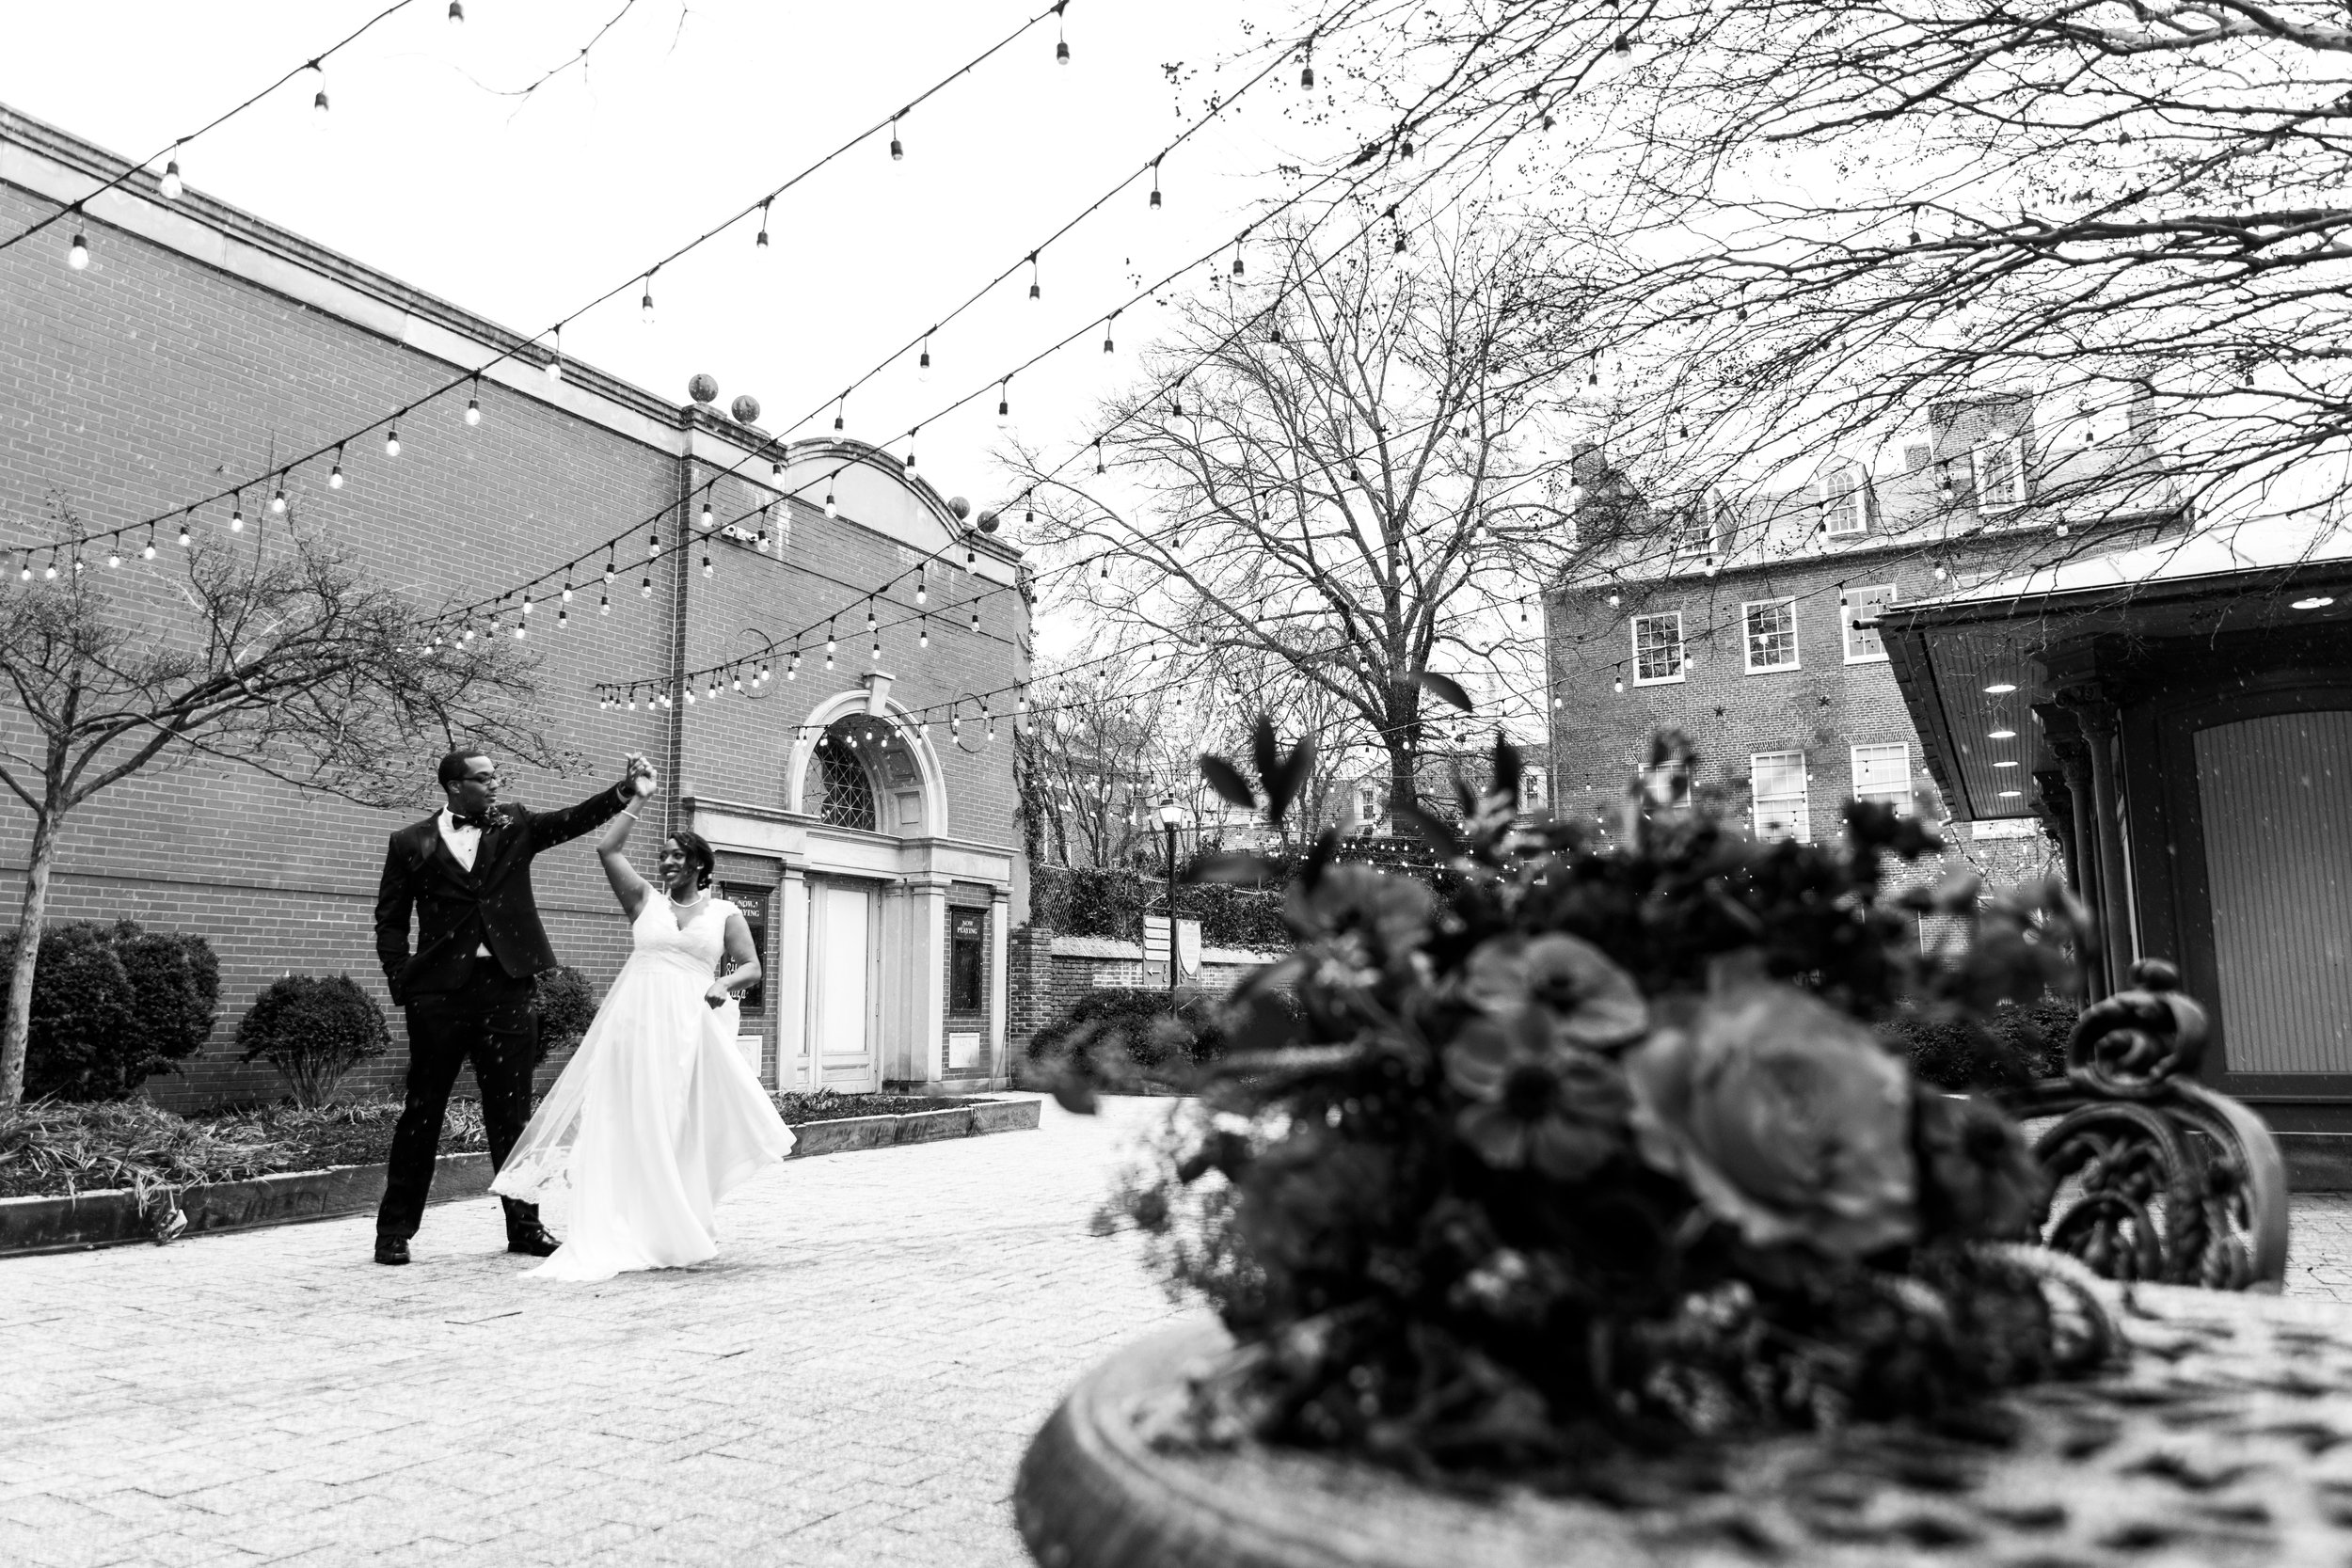 Snowy Winter Wedding at 1840's Plaza in Baltimore City Megapixels Media Photography-24.jpg